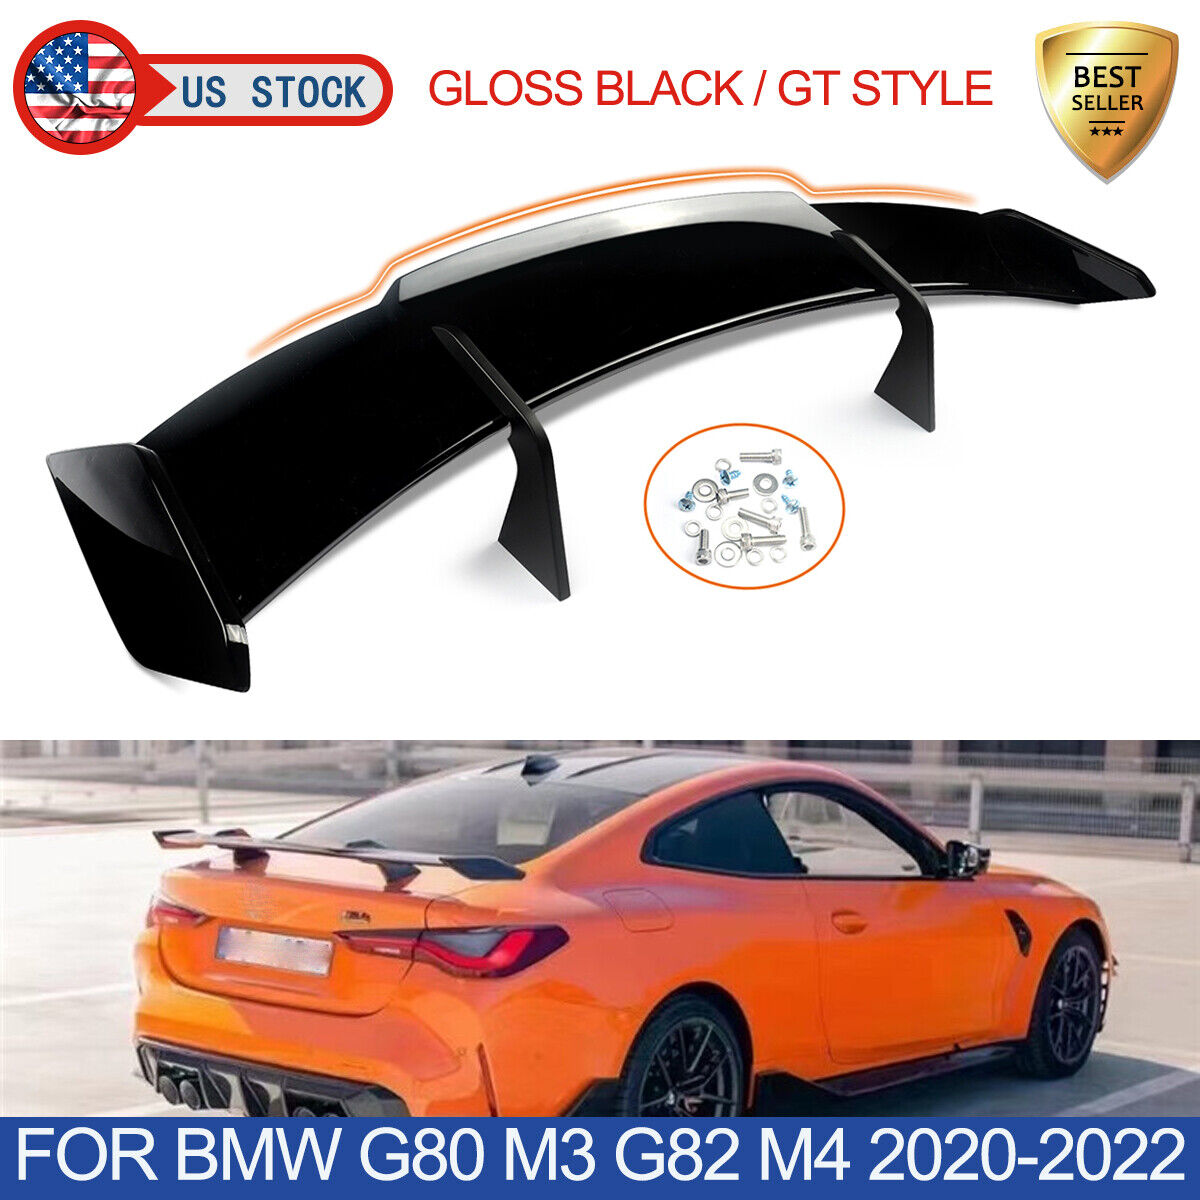 High-kick GT Style Rear Spoiler Wing For BMW G80 M3 G82 M4 2020-22 Glossy Black